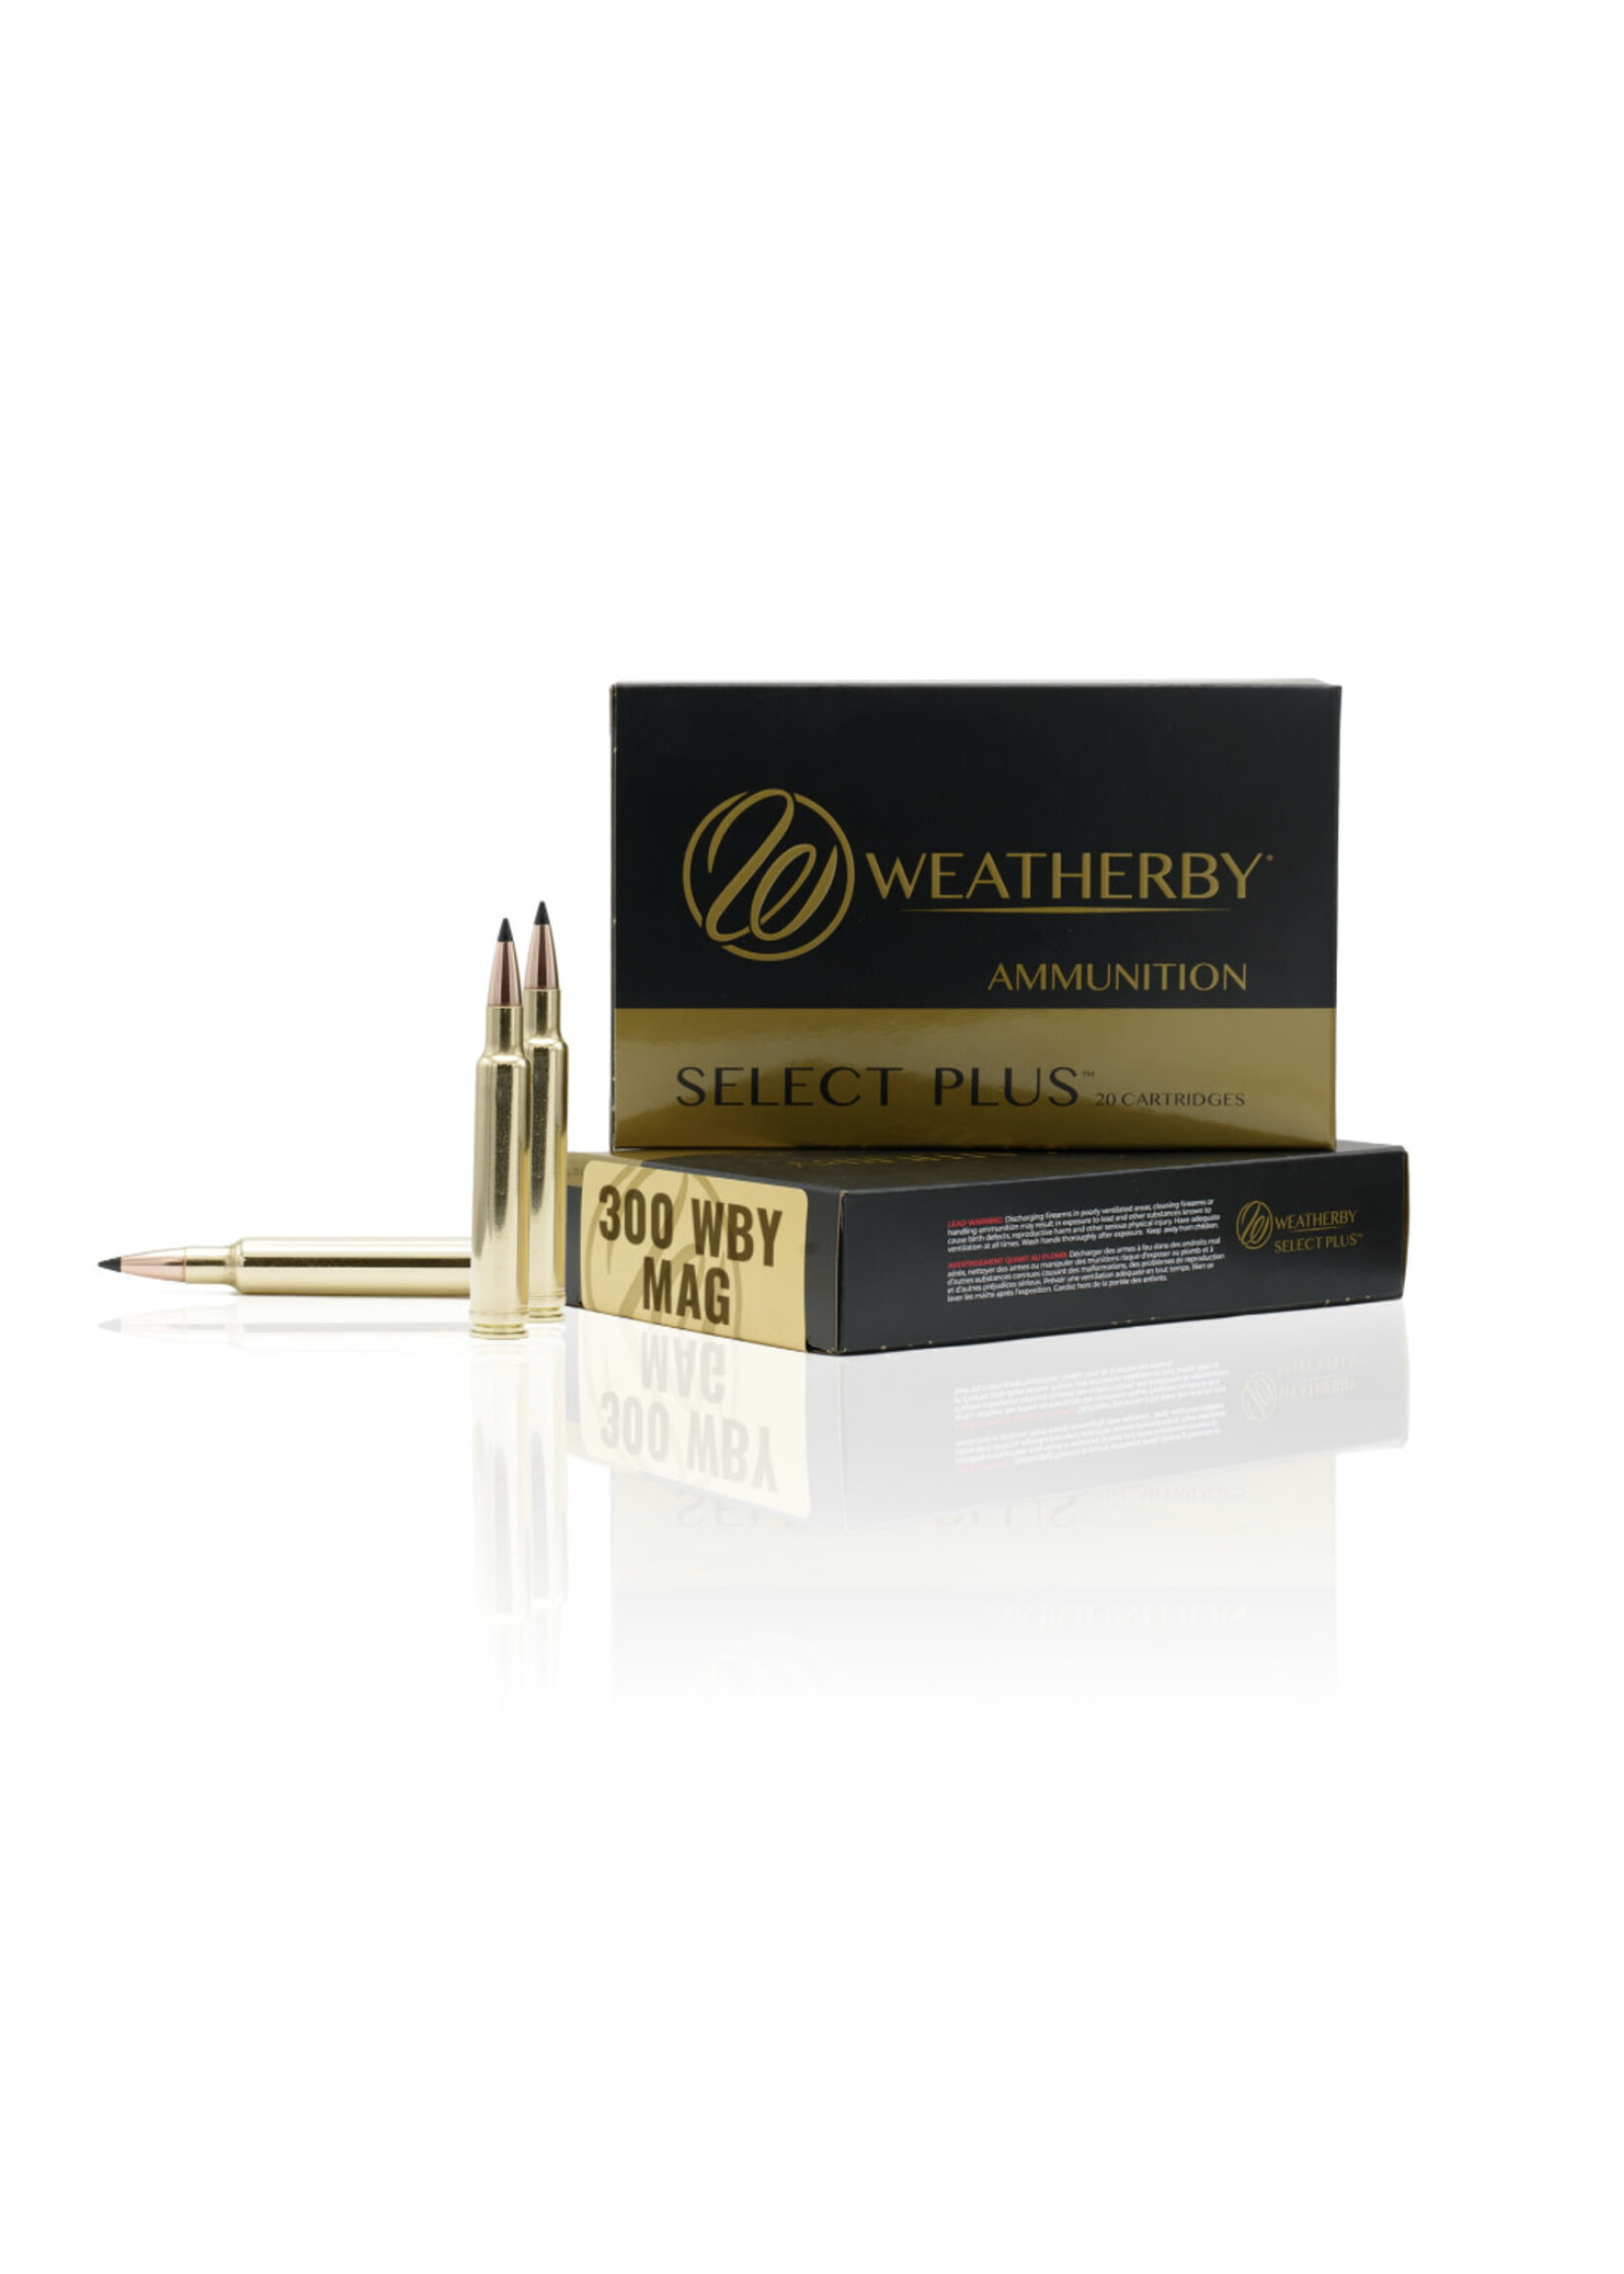 WEATHERBY WEATHERBY 300 WBY MAG SELECT PLUS 200 GR HORNADY ELD-X 20 RDS